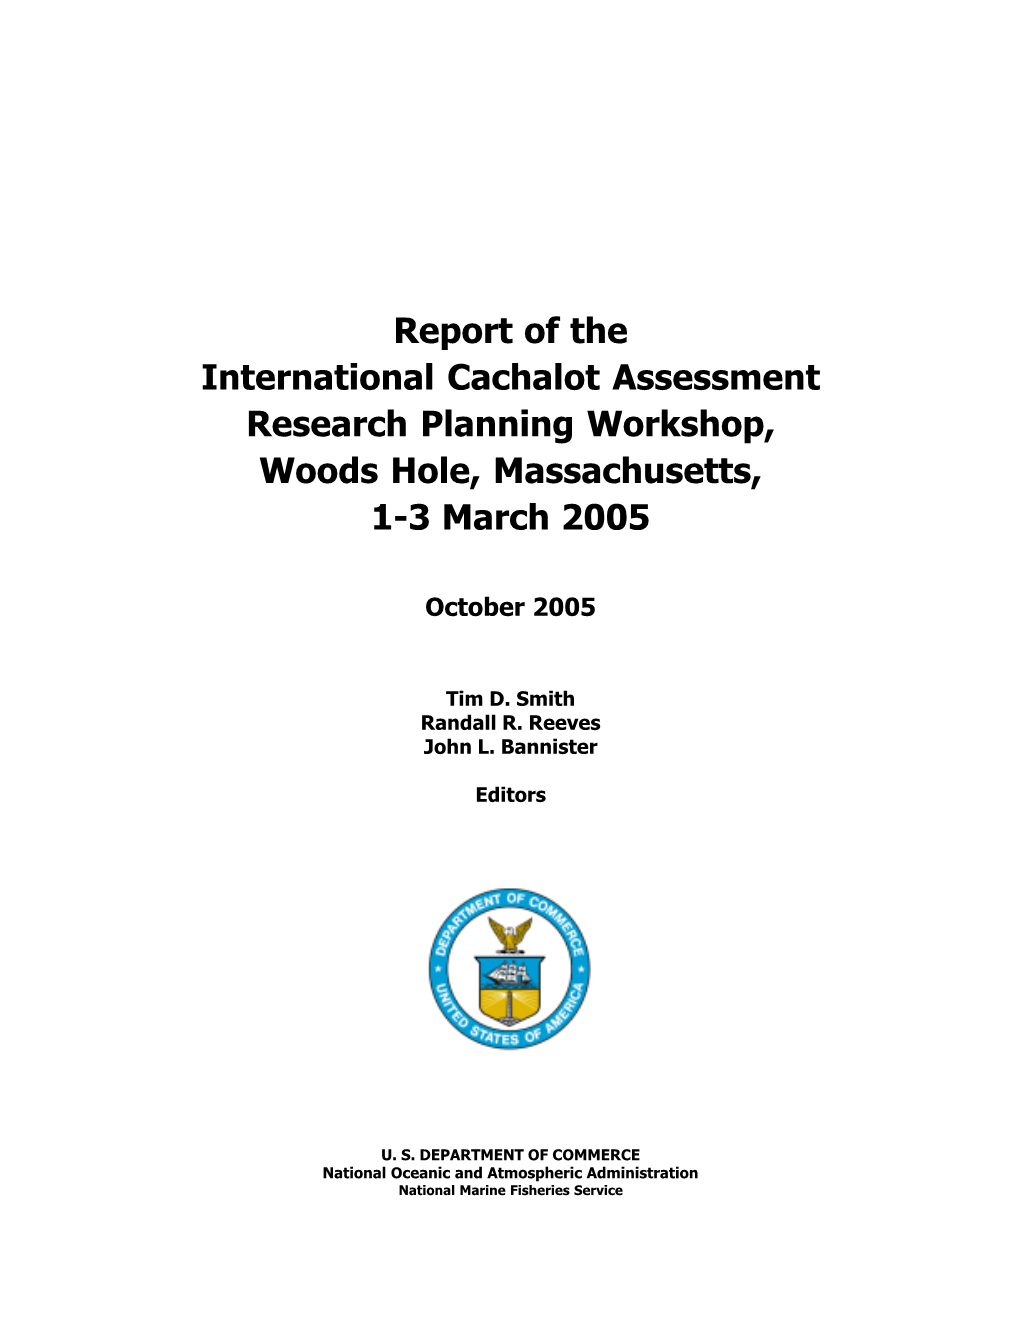 Report of the International Cachalot Assessment Research Planning Workshop, Woods Hole, Massachusetts, 1-3 March 2005